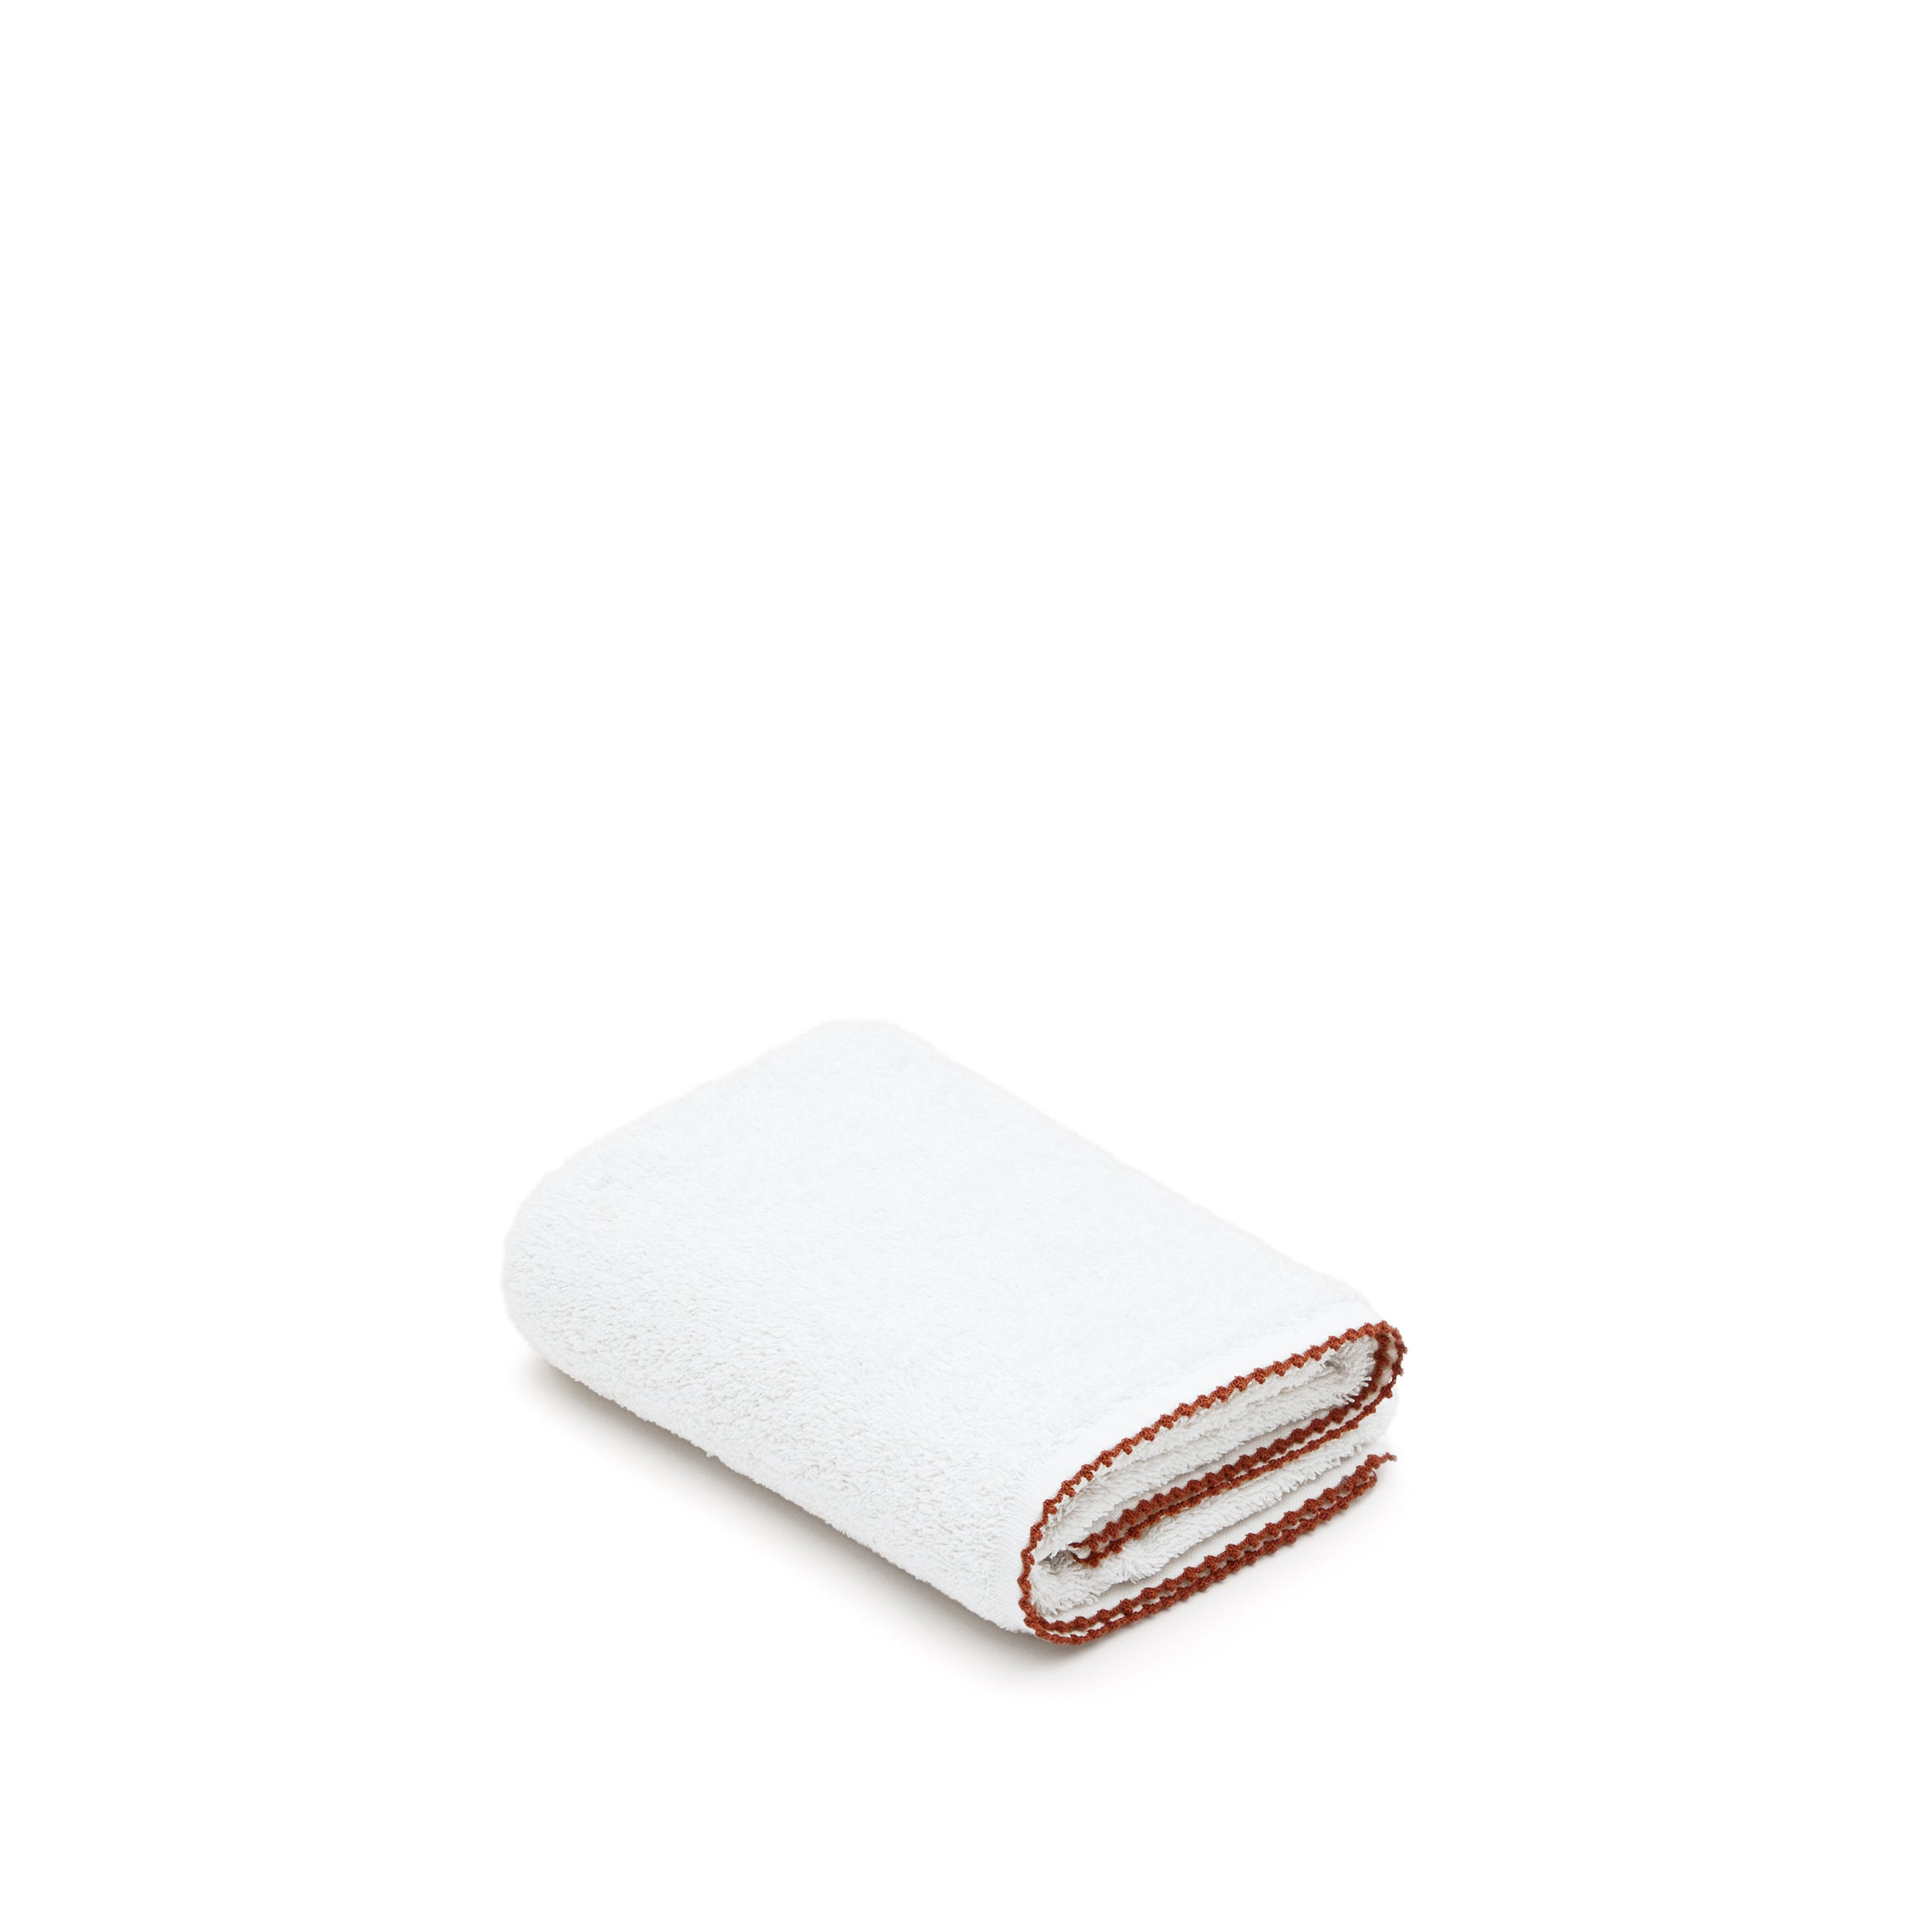 Sinami hand towel made of 100% white cotton with contrasting terracotta details 50 x 90 cm